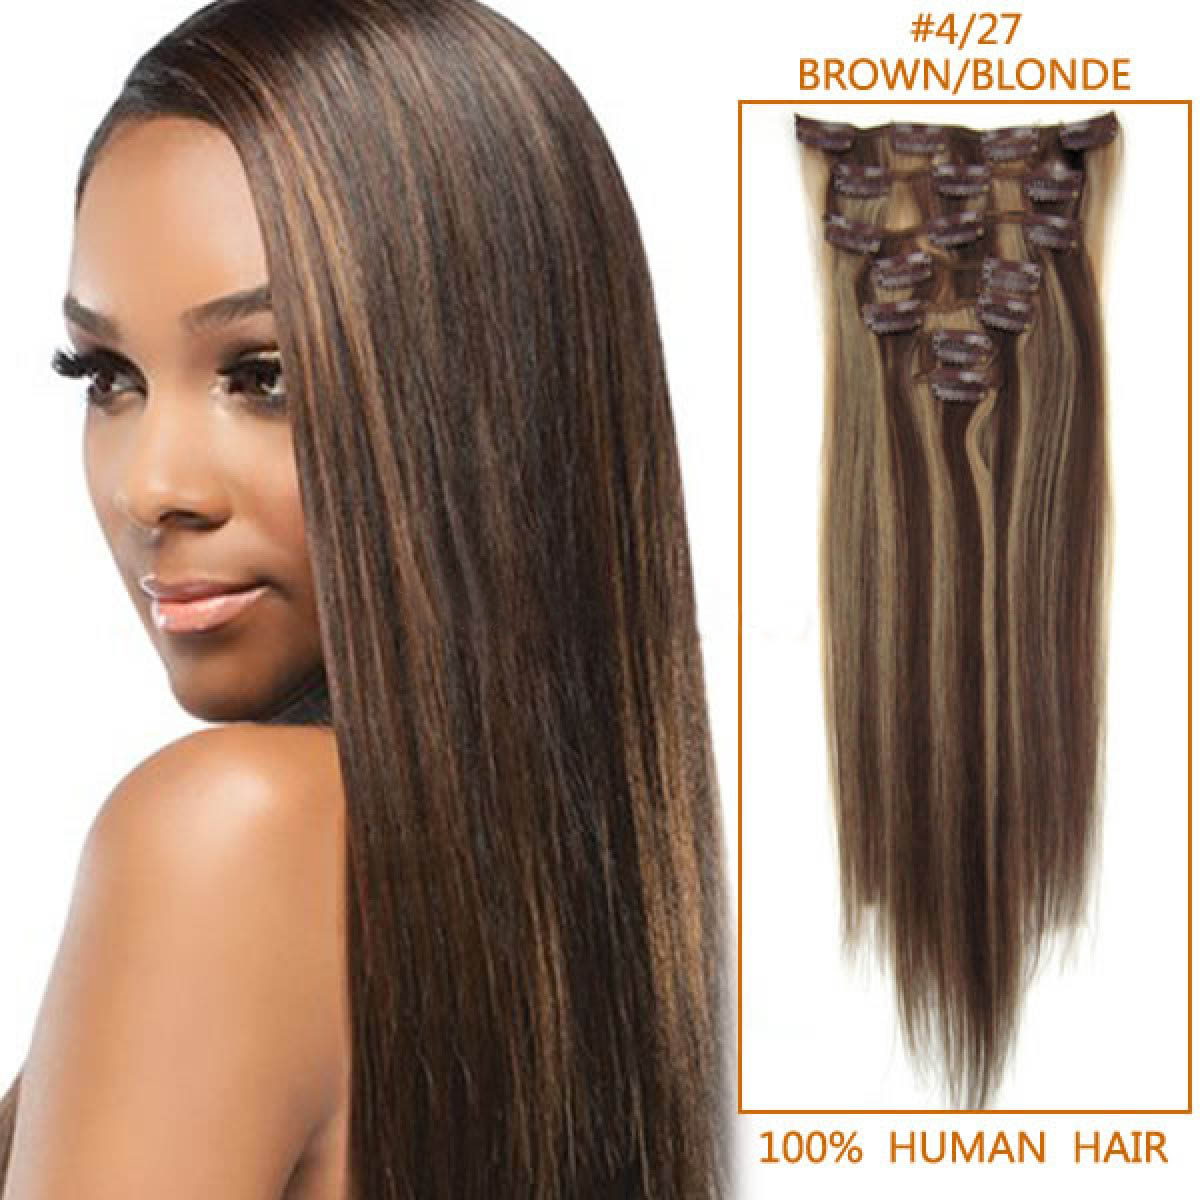 20 Inch #4/27 Brown/Blonde Clip In Human Hair Extensions 8pcs